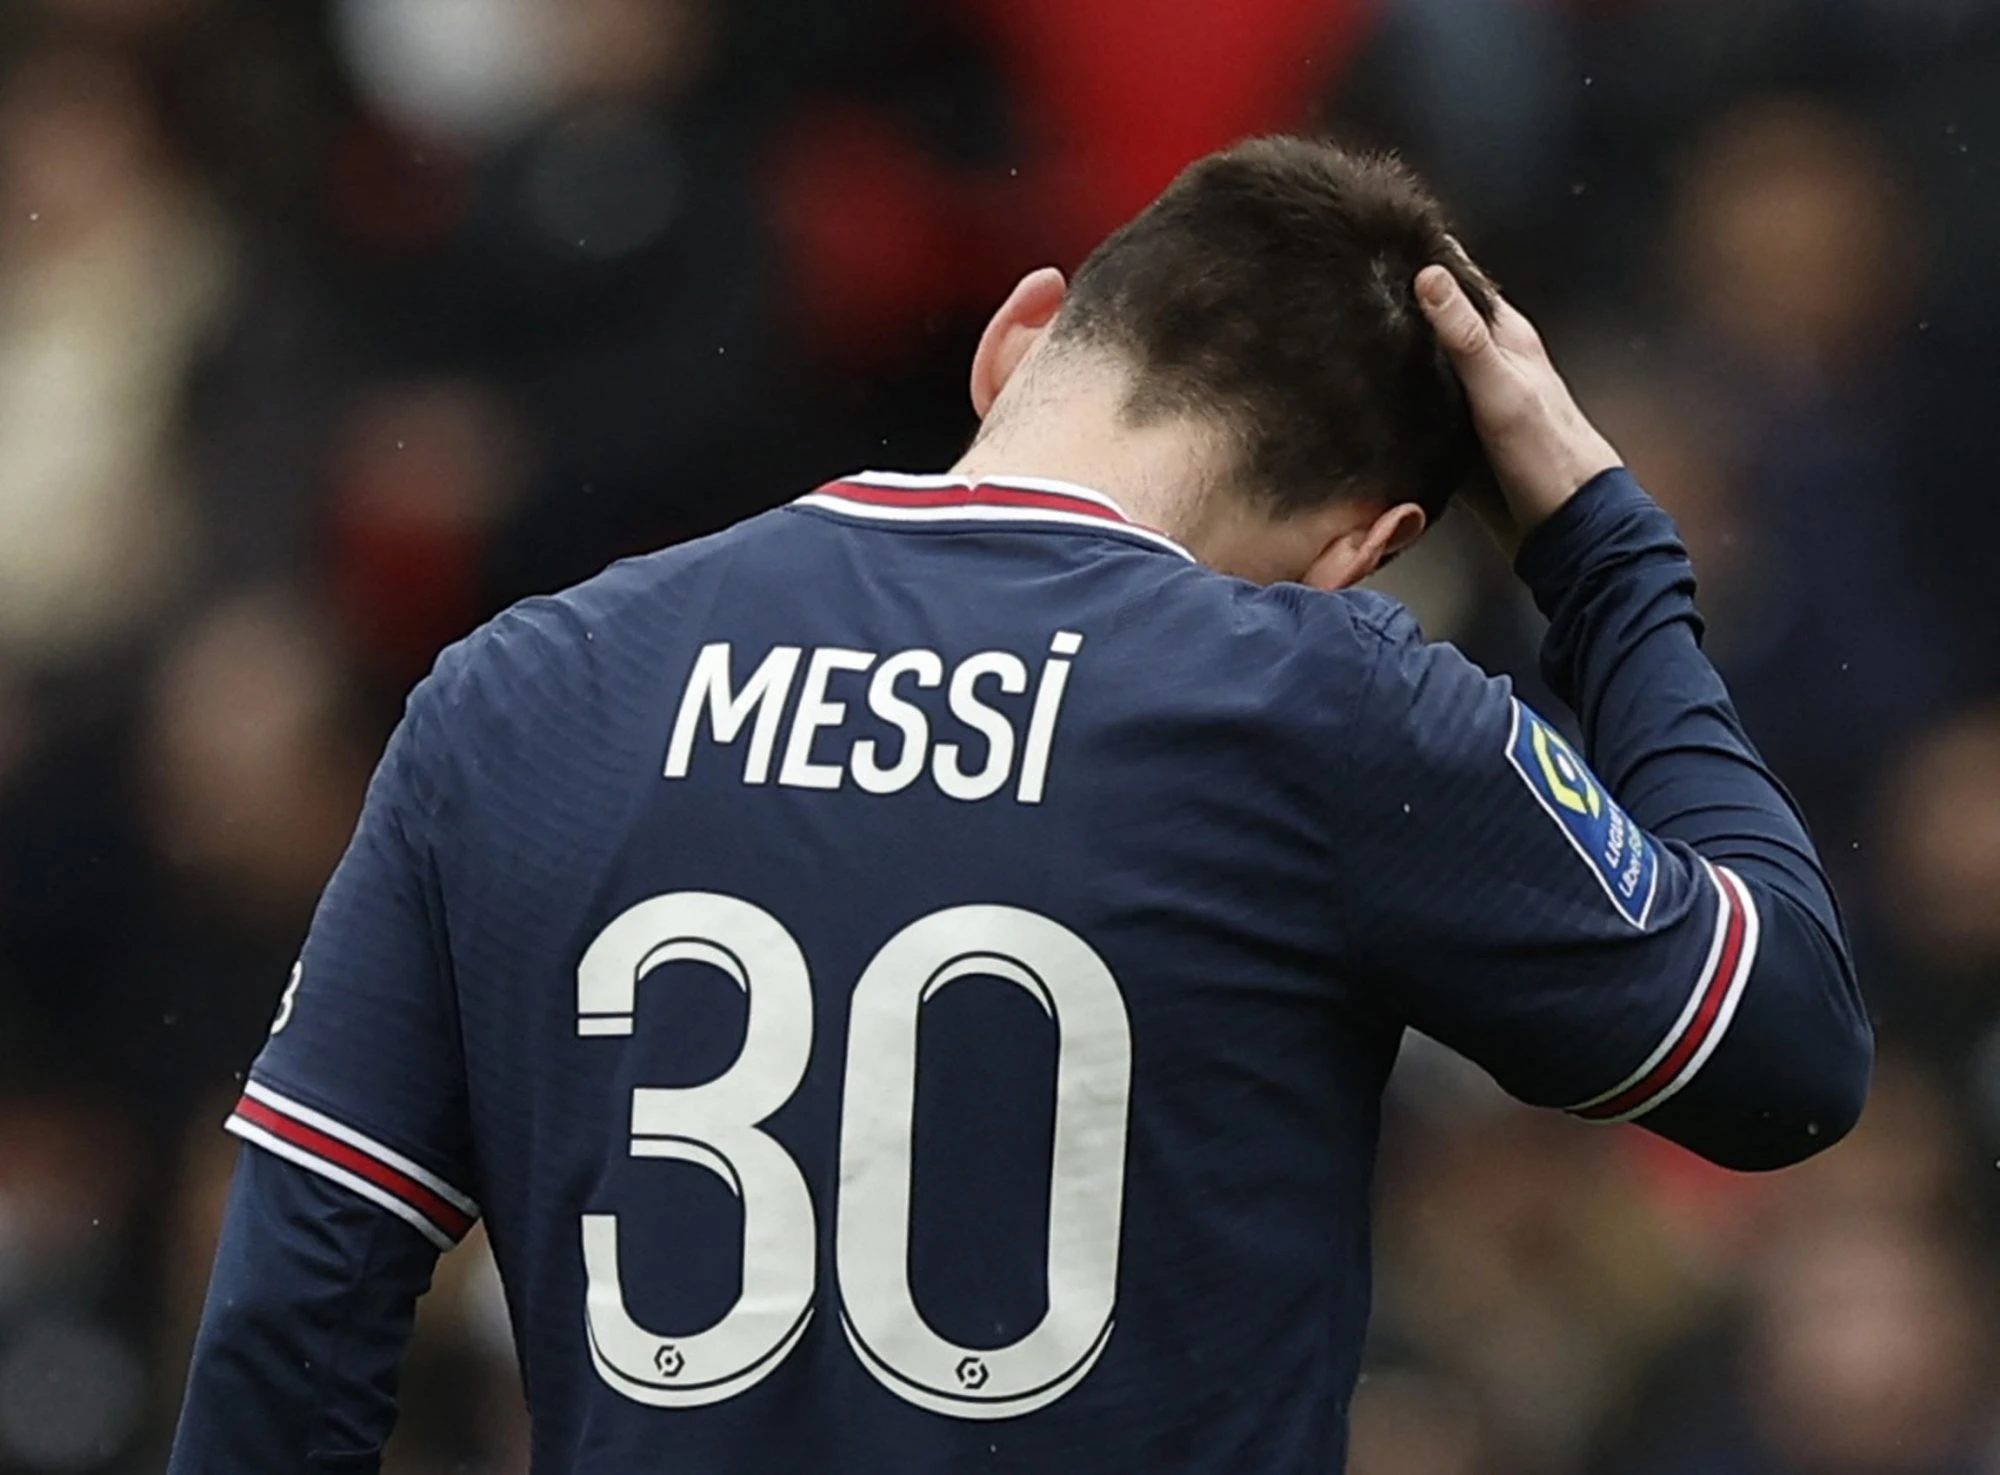 Why was Messi booed in the PSG game? Image Credits:- New York Post.